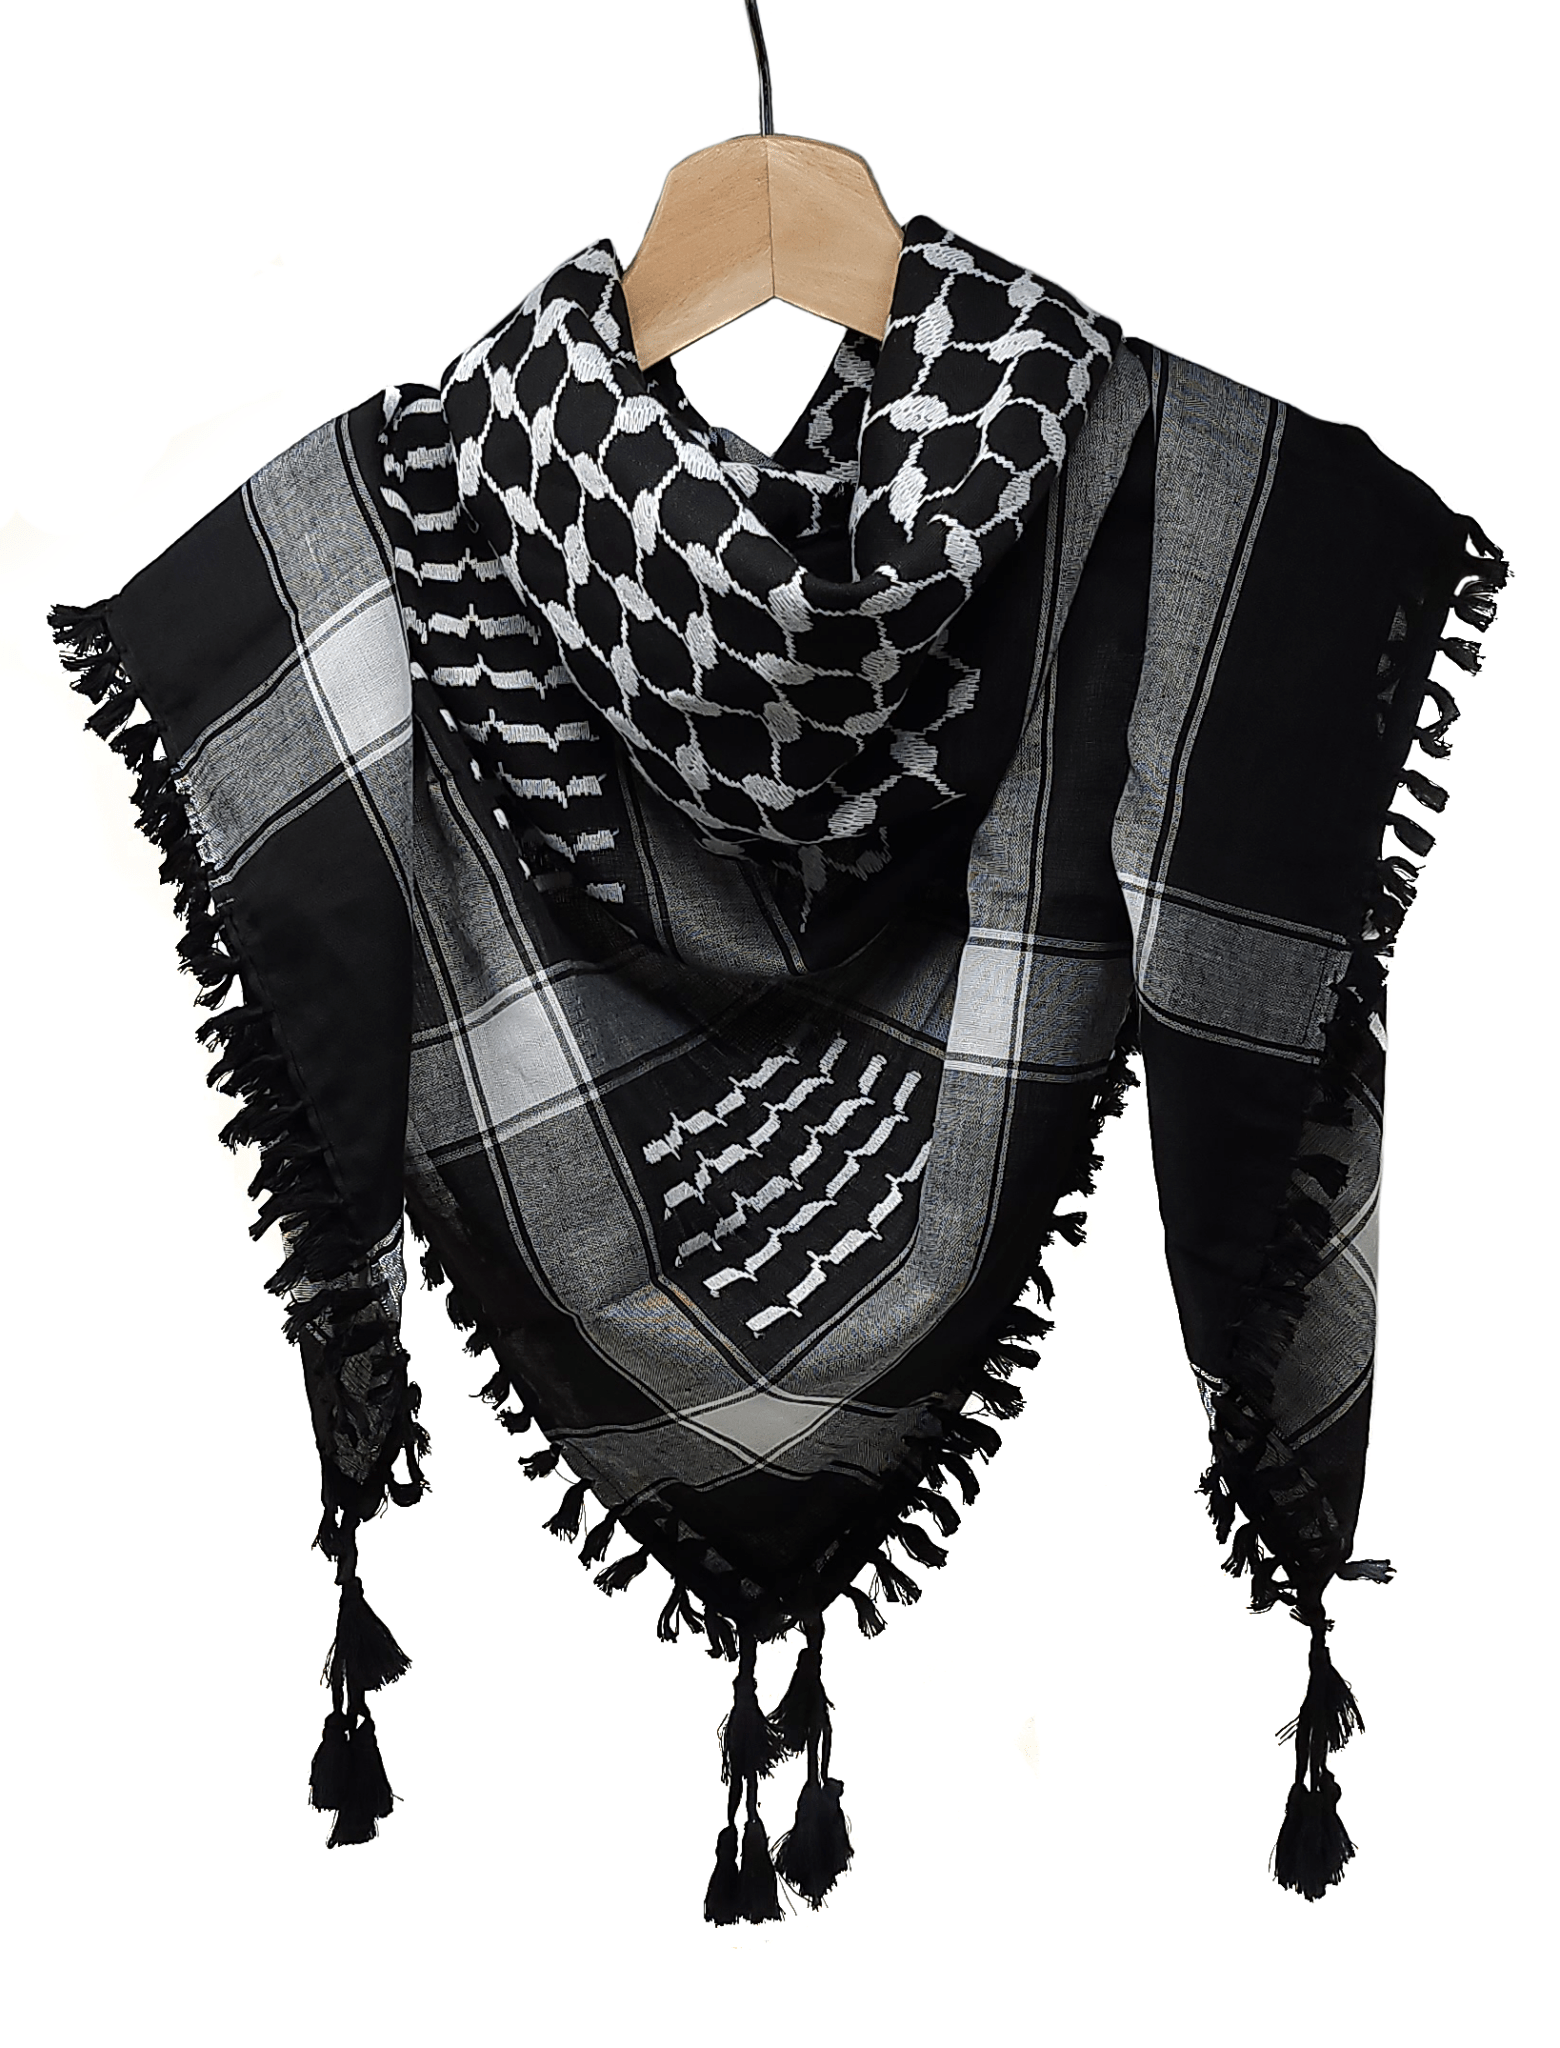 Palestine Keffiyeh Scarf - Traditional Shemagh with Tassels, Arab Style  Headscarf for Men and Women